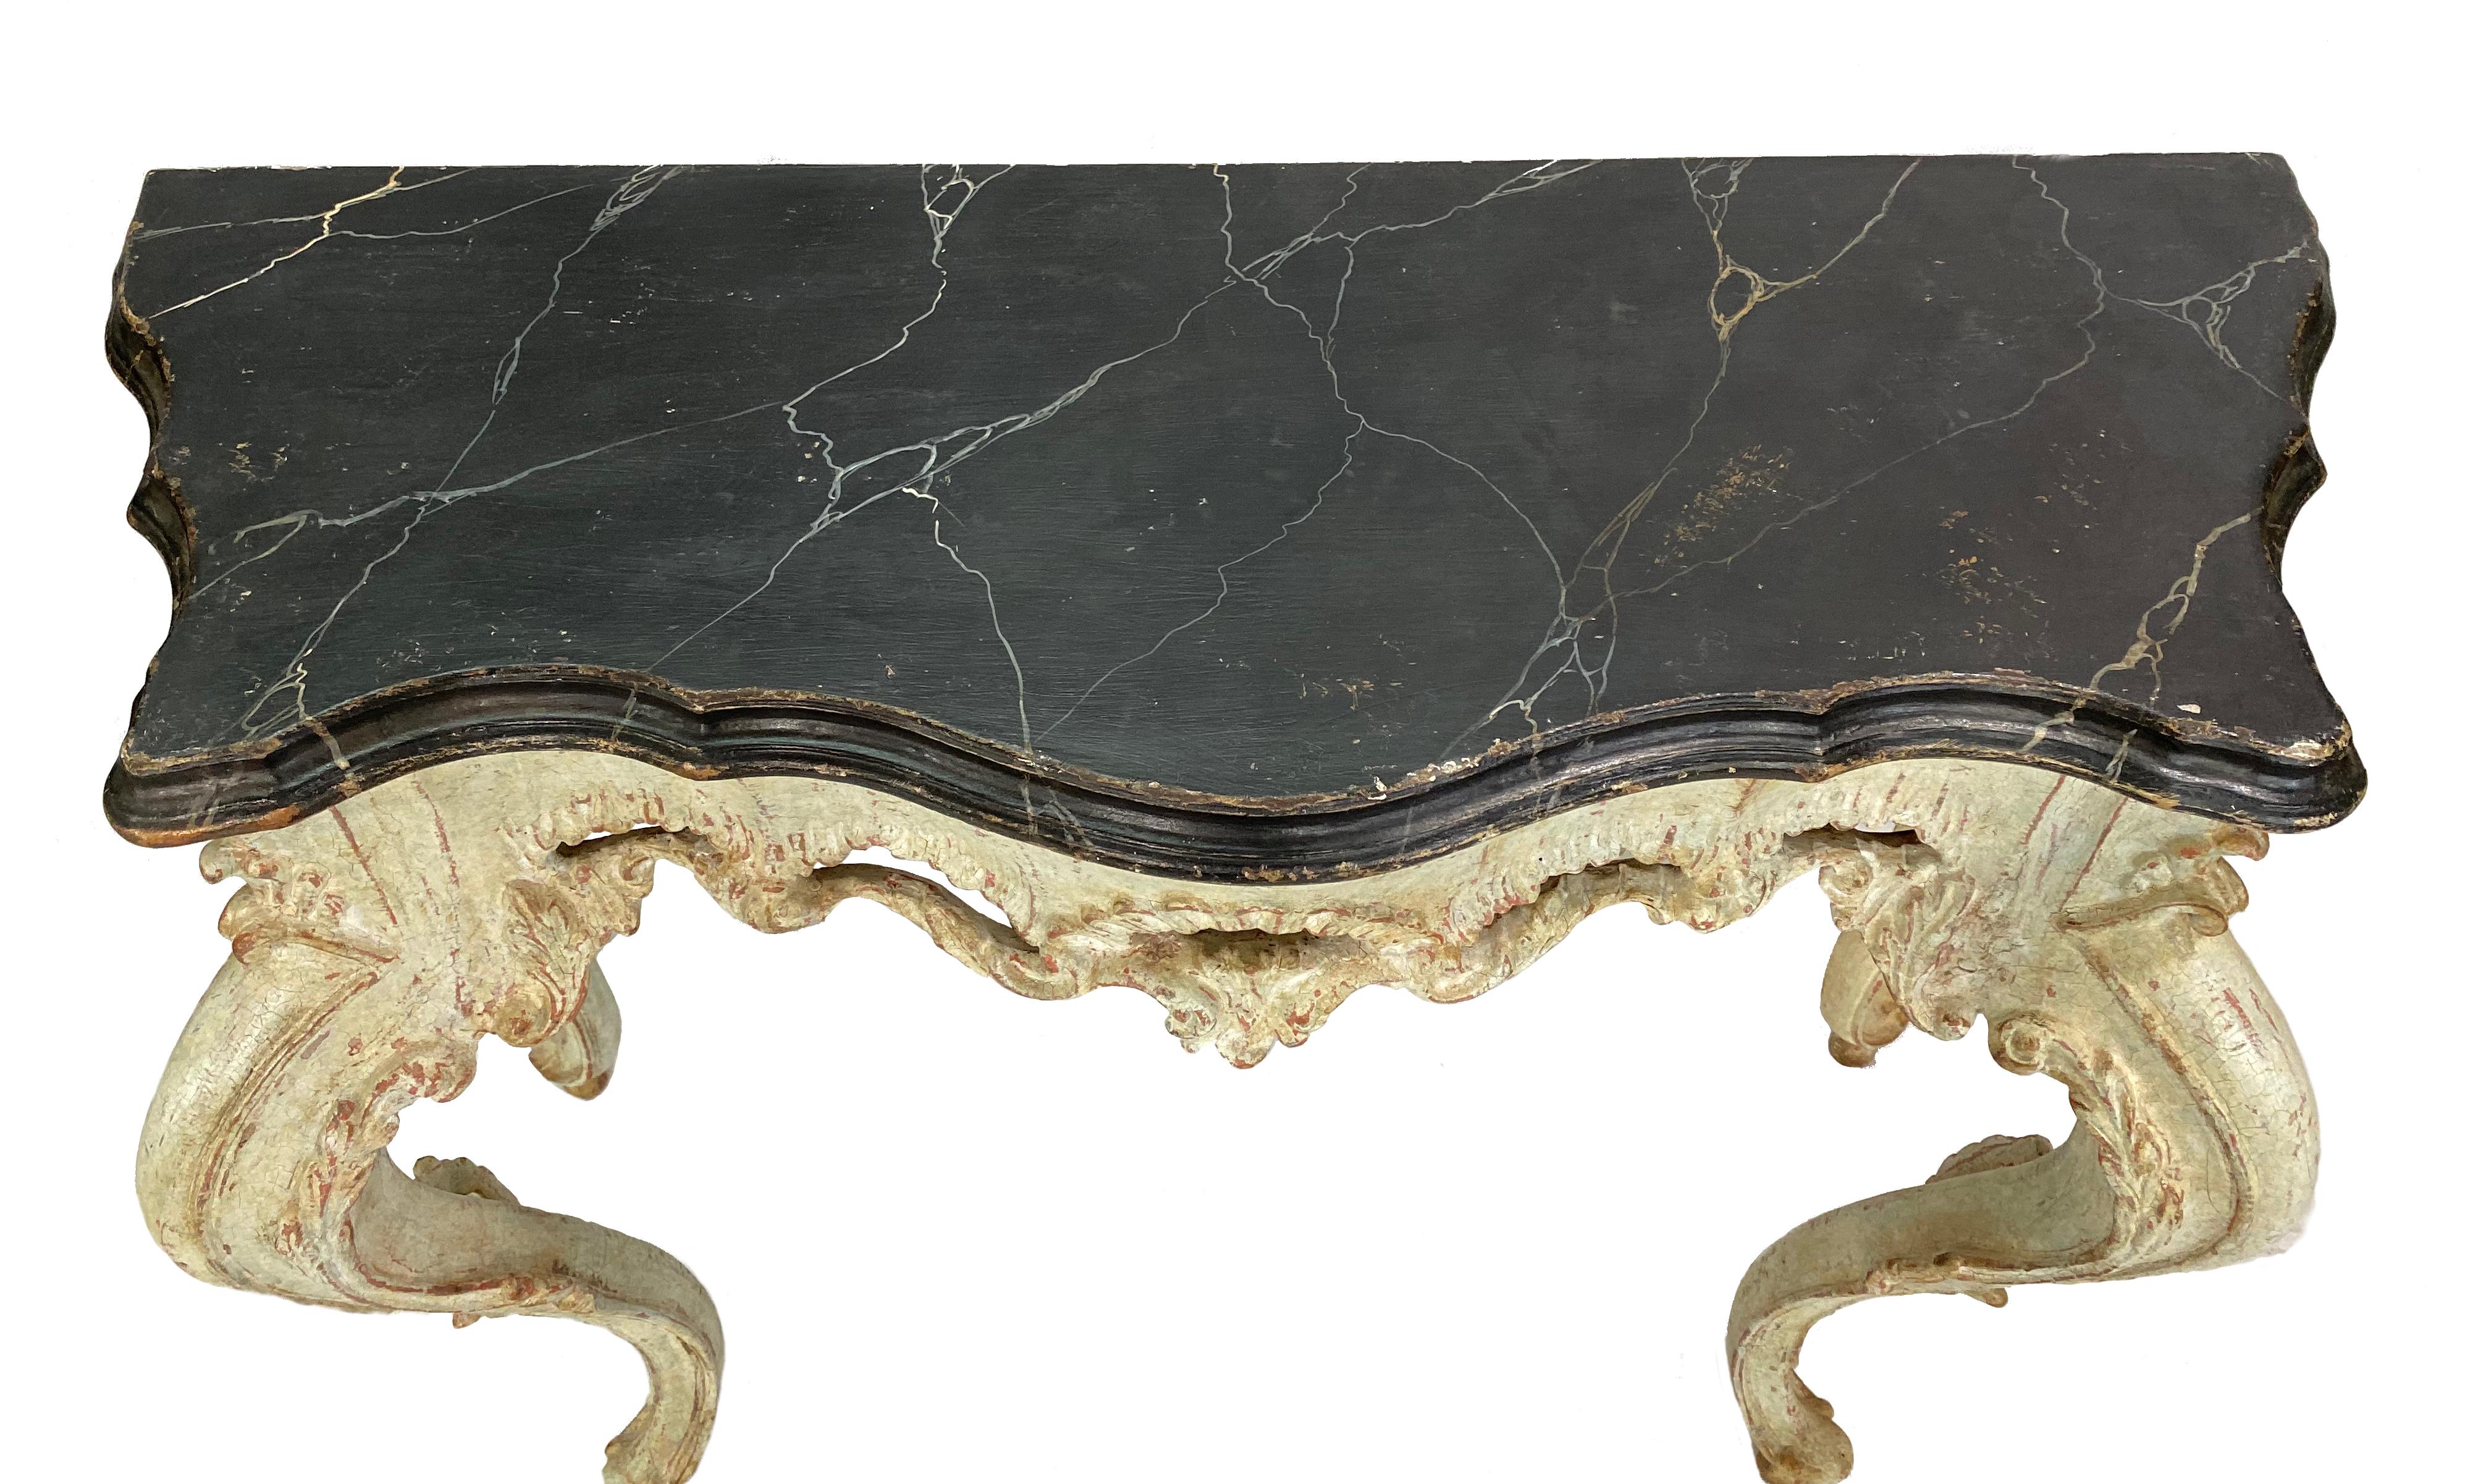 Stunning pair of 18th century painted Louis XV Italian consoles. The top is a painted black faux marble and the legs are a beautiful ivory with little flecks of red.